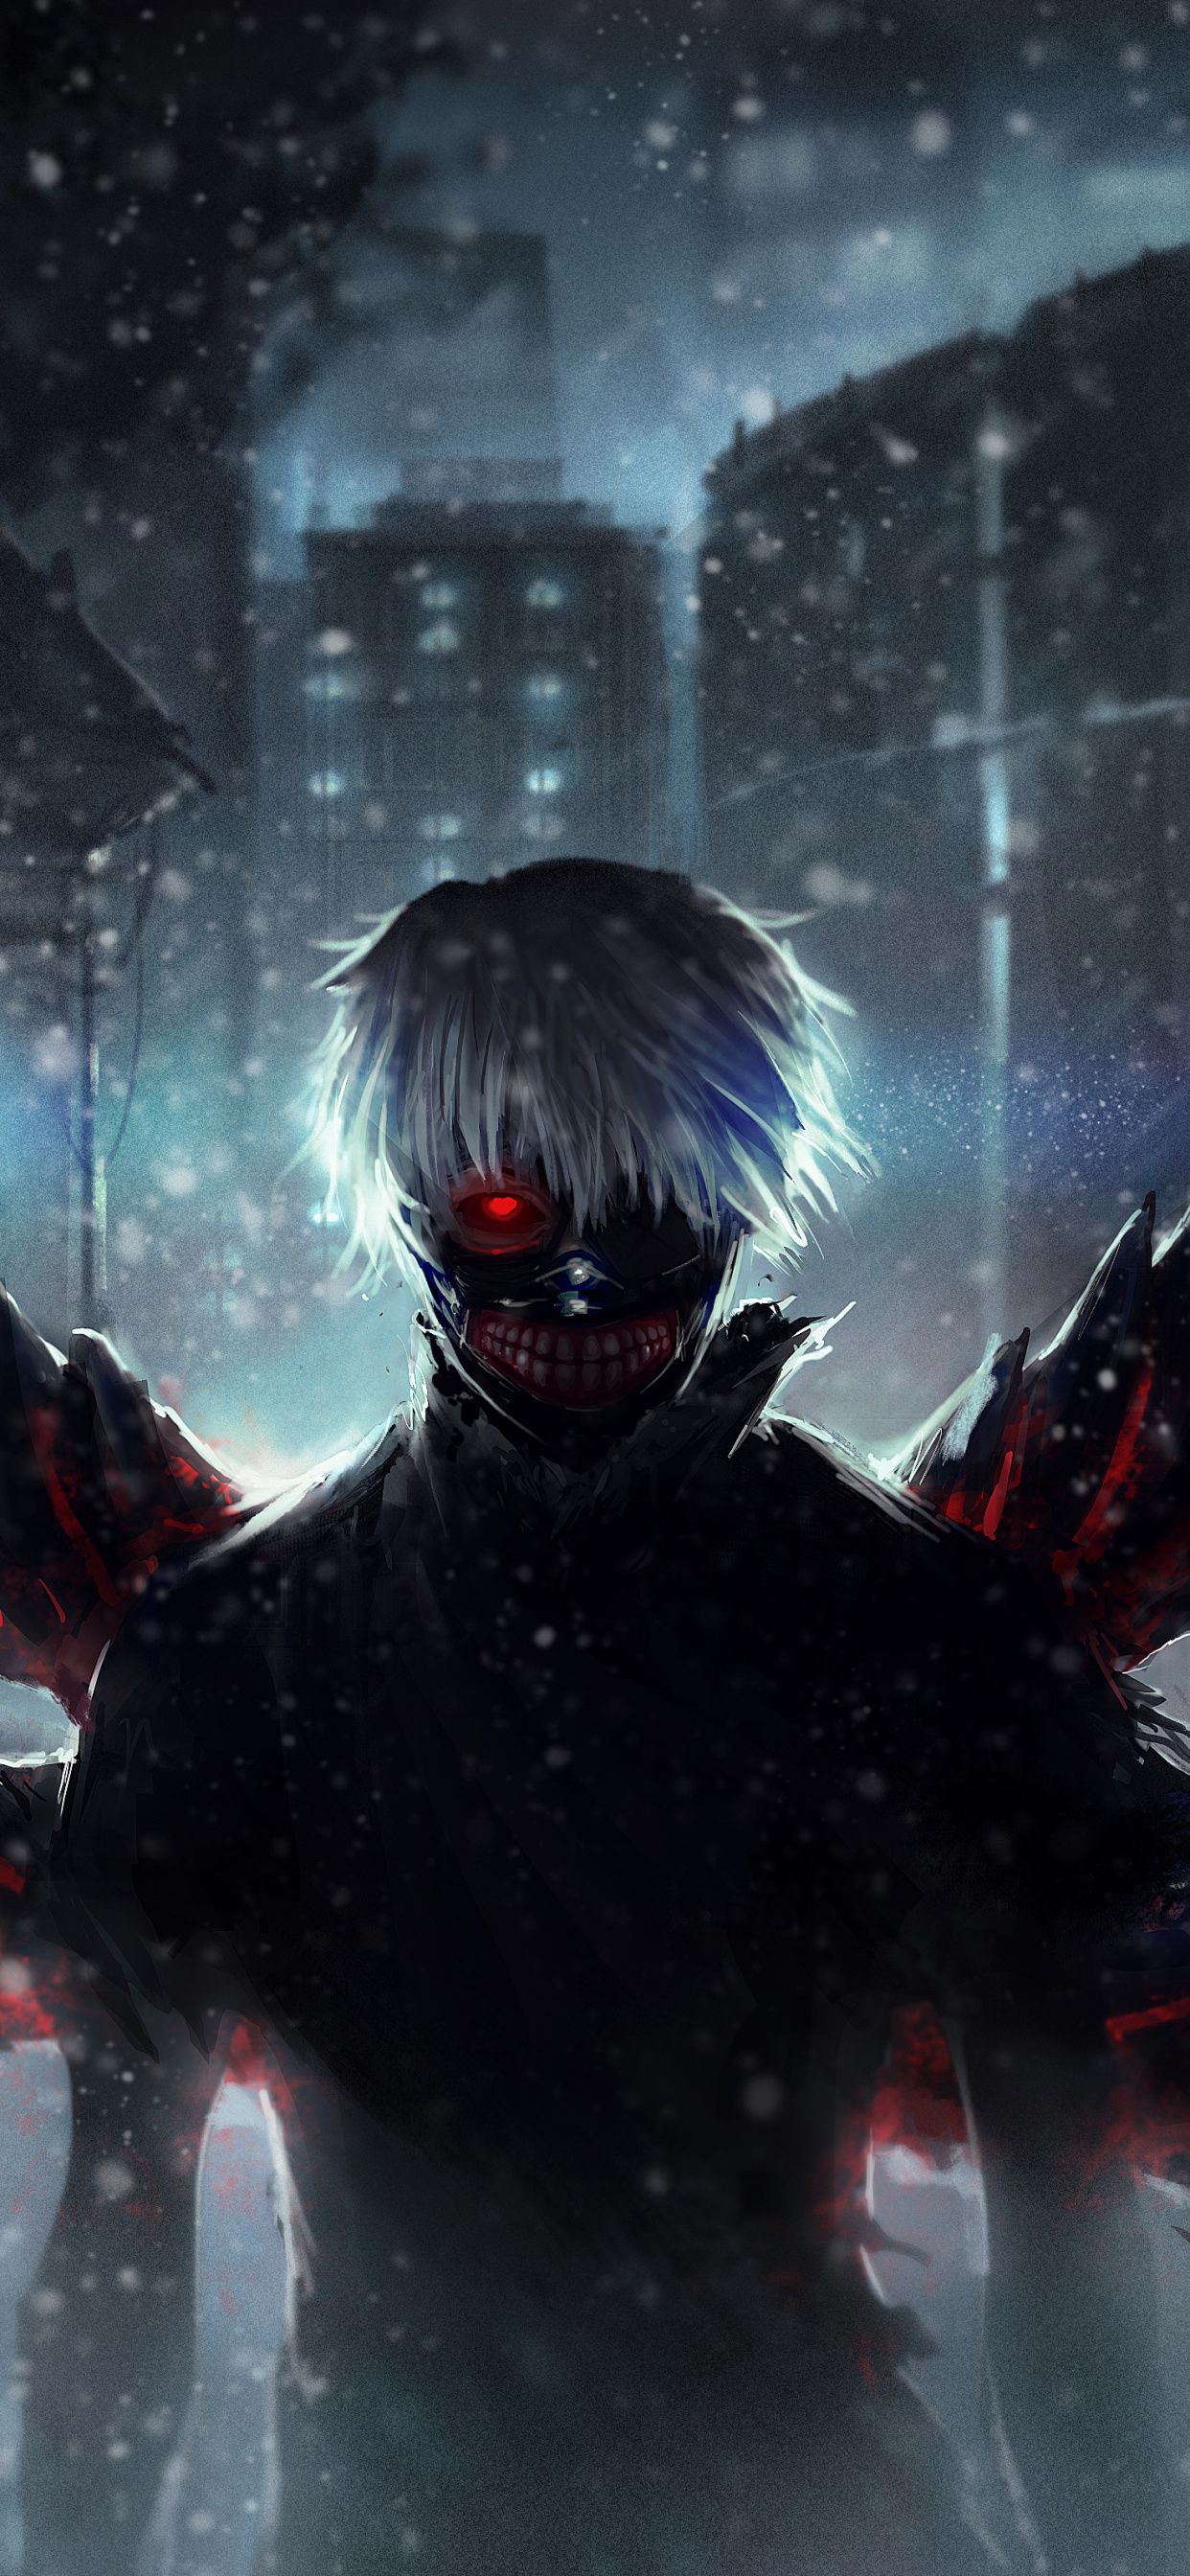 Featured image of post Iphone 4K Ultra Hd Iphone Tokyo Ghoul Wallpaper - Latest post is haise sasaki tokyo ghoul:re 4k wallpaper.